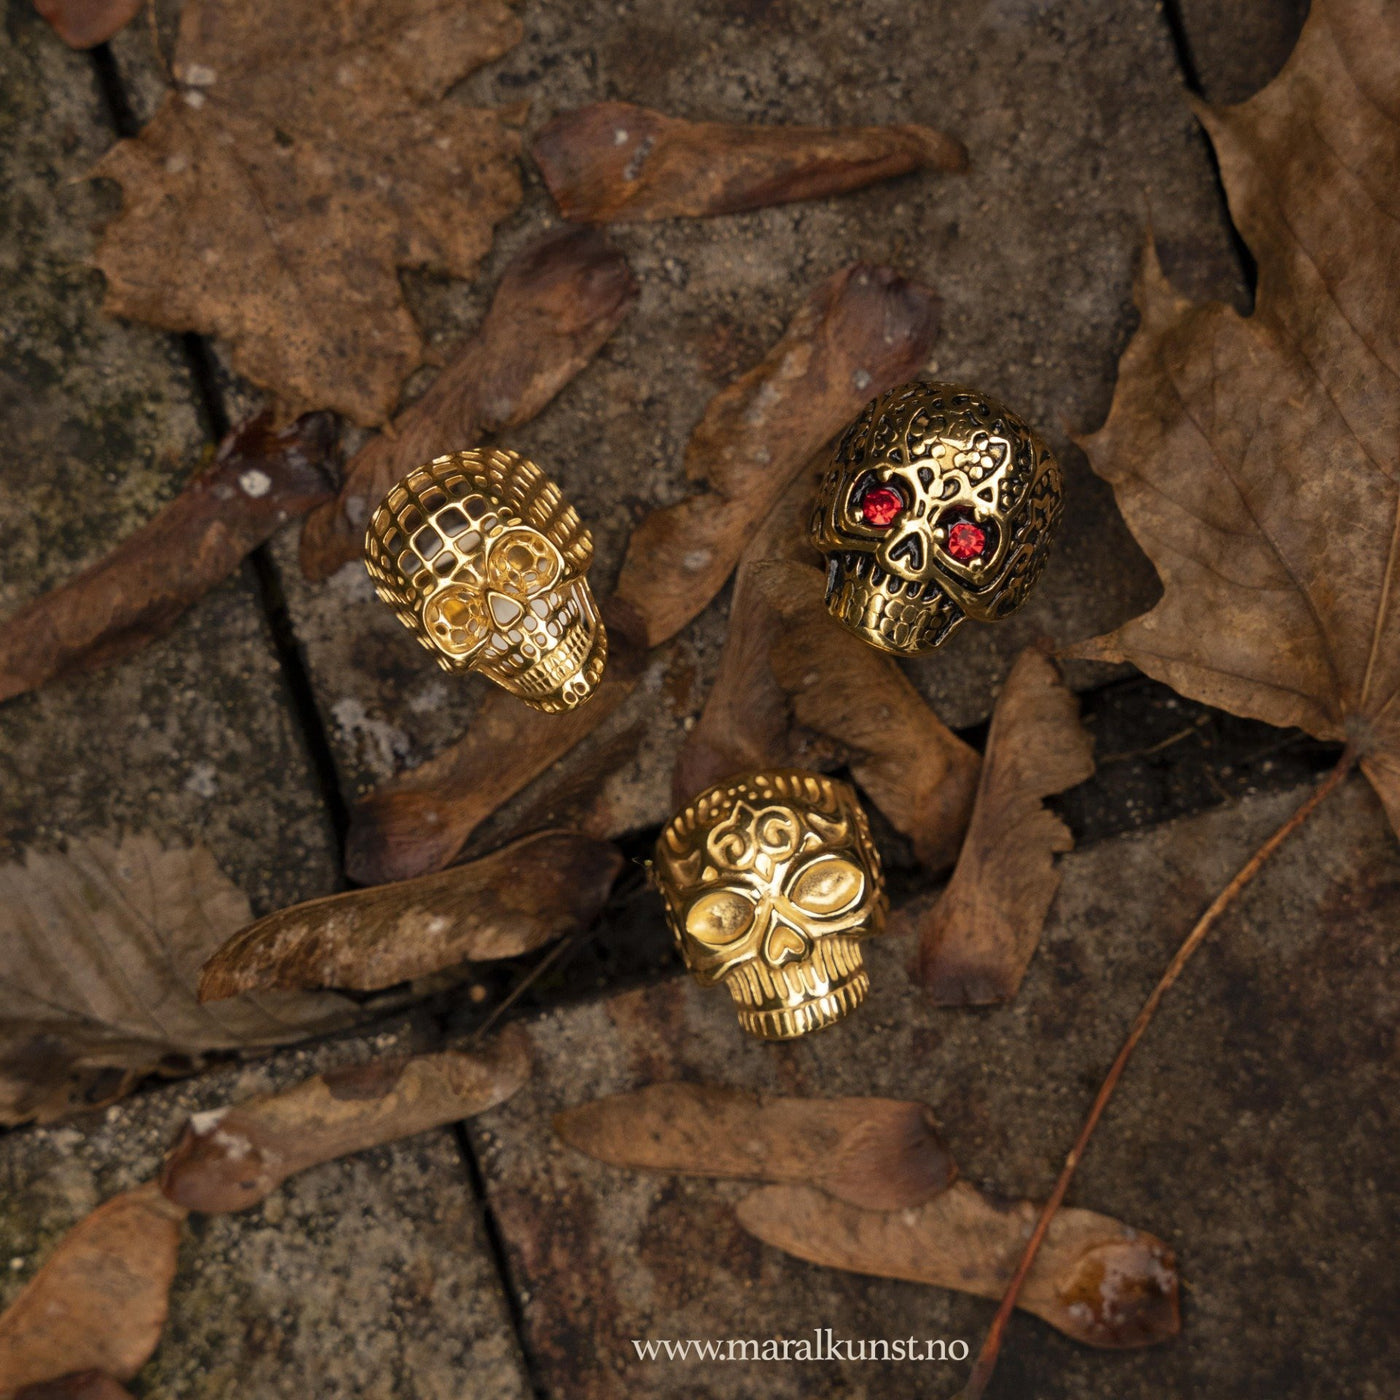 Skull Ring in Gold - Maral Kunst Jewelry